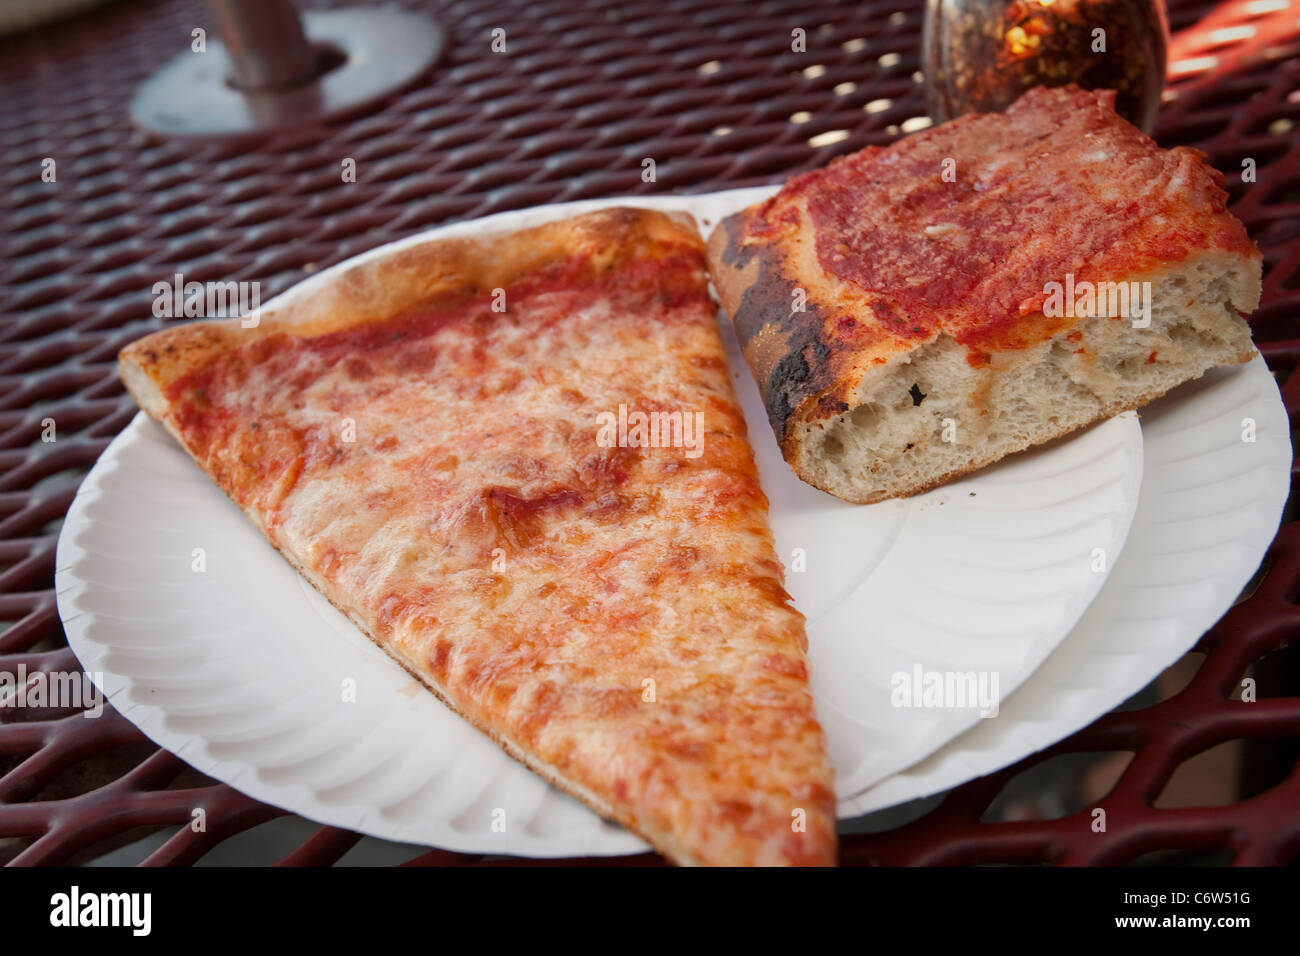 New York Regular Slice and a Napolitan Square pizza at Spumoni Garderns in the New York city borough of Brooklyn Stock Photo